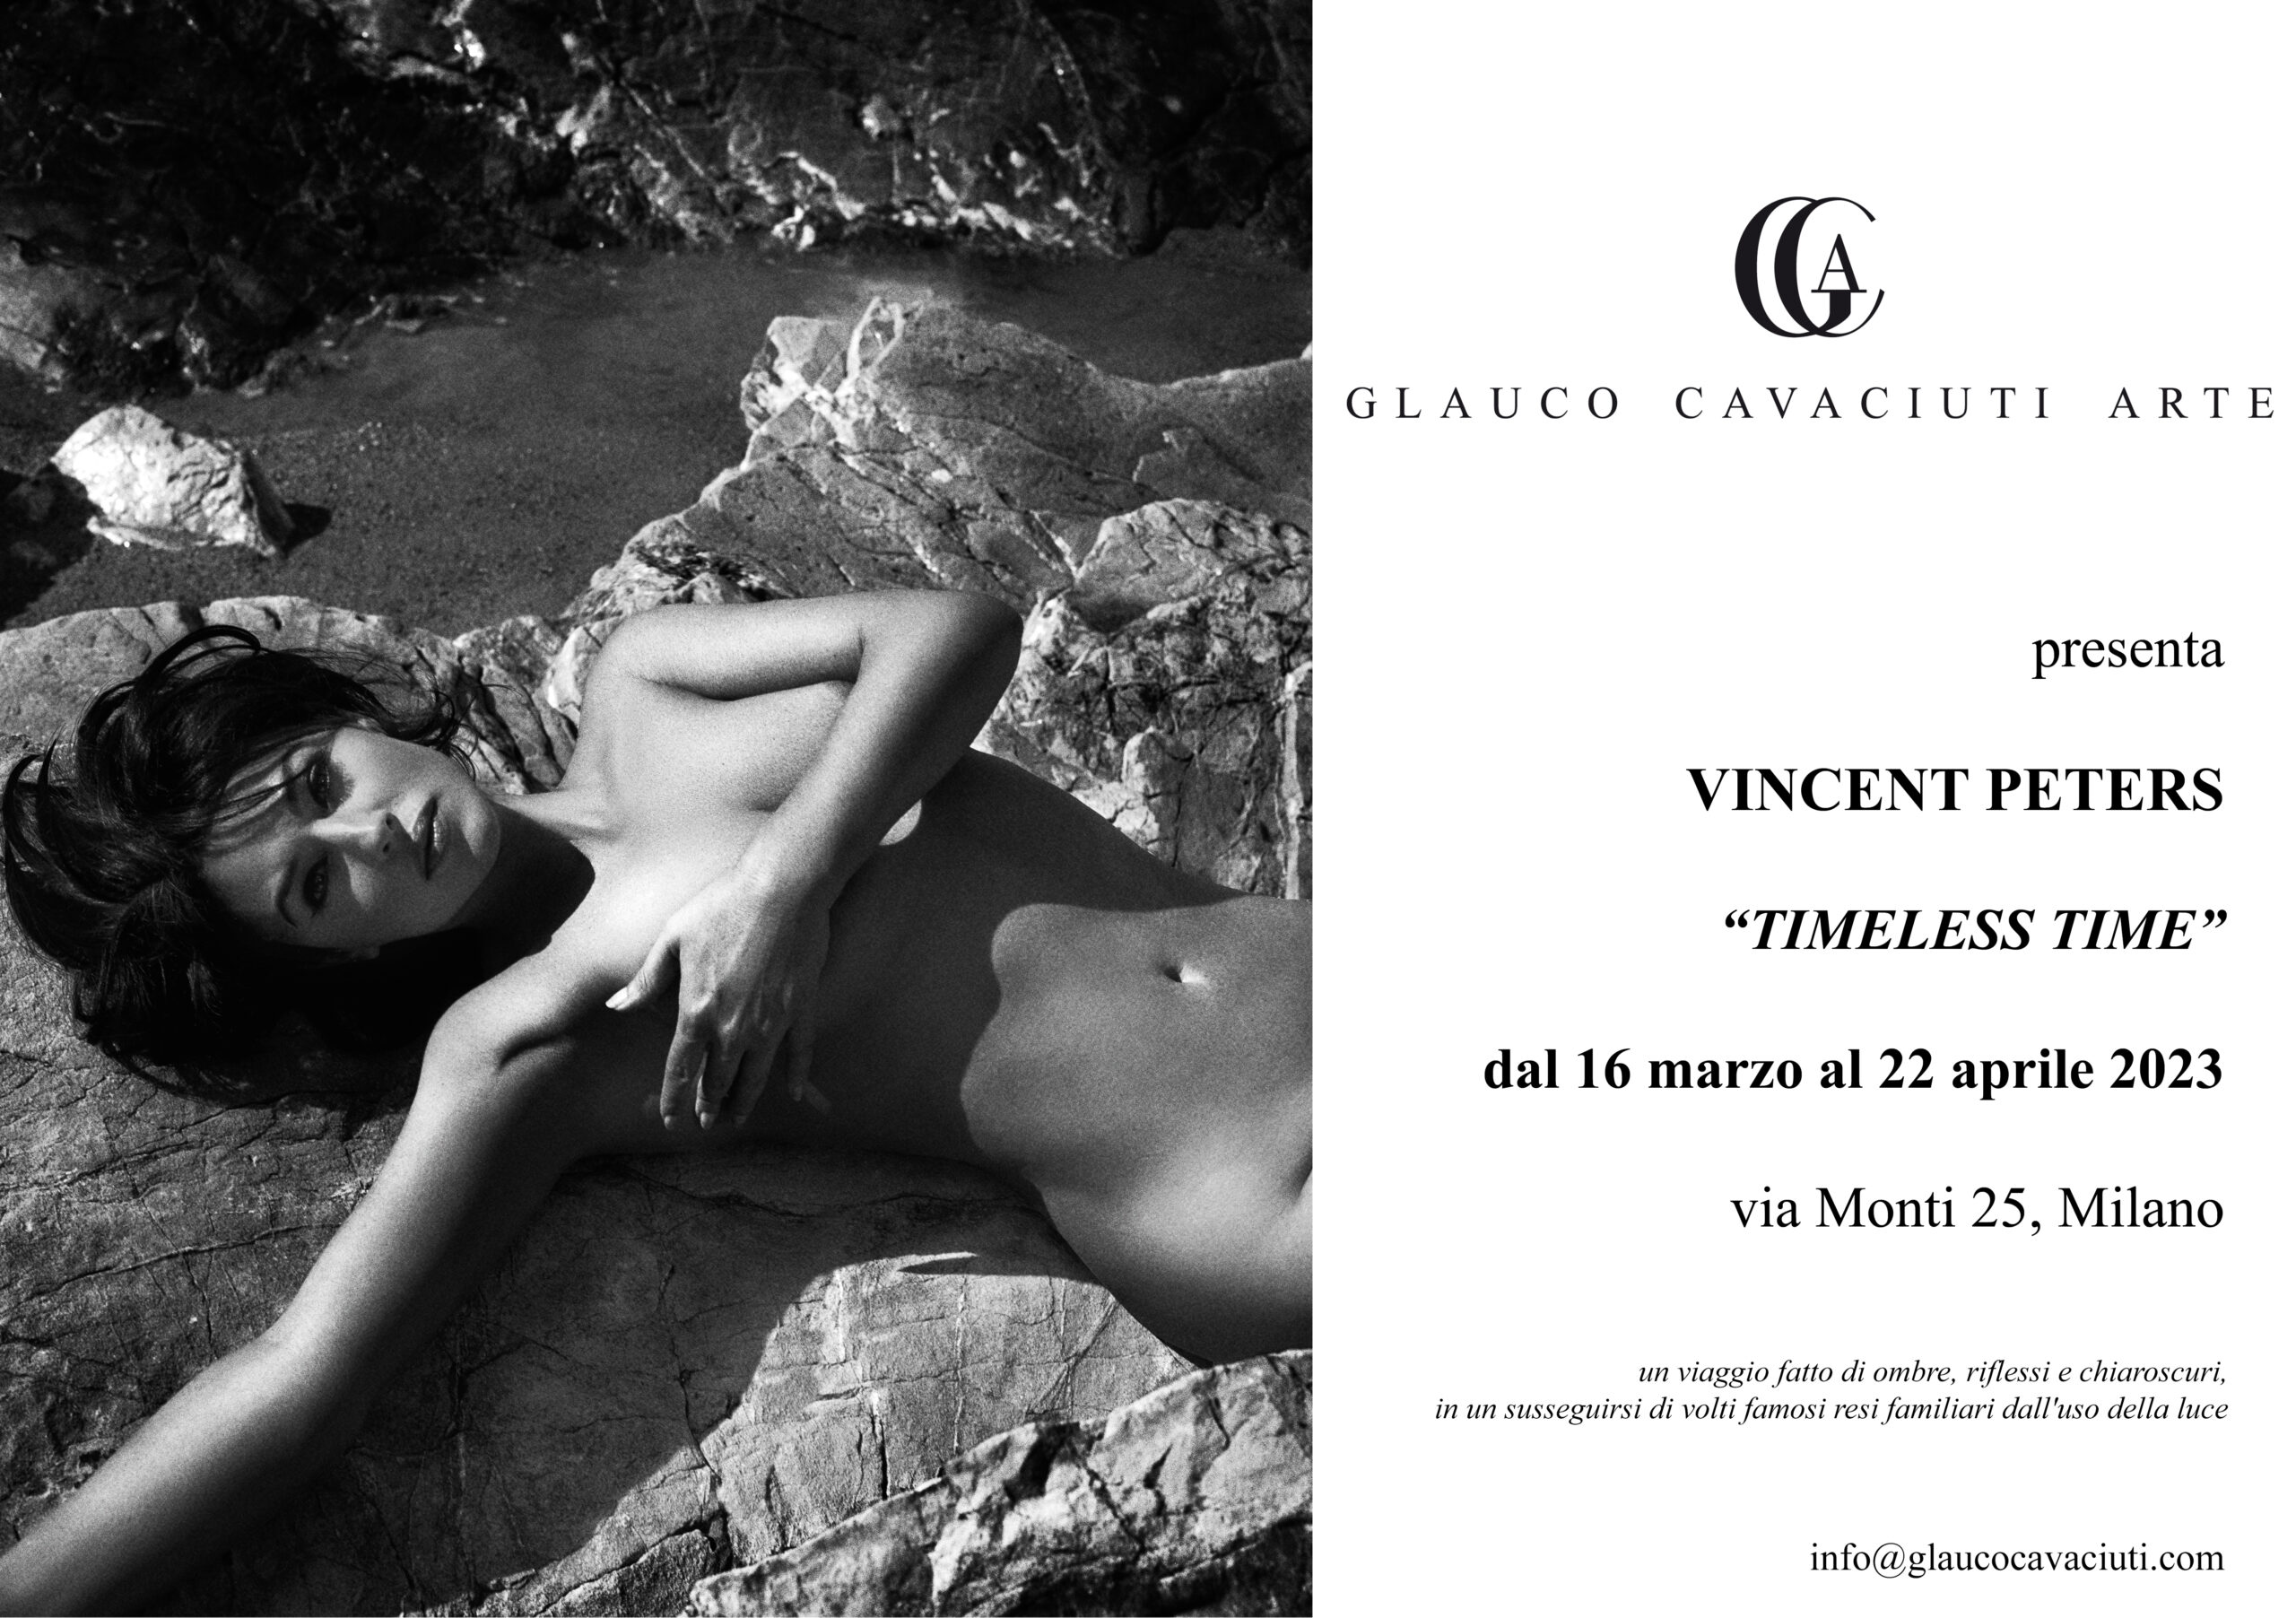 VINCENT PETERS DA PALAZZO REALE IN GALLERIA CON “TIMELESS TIME”